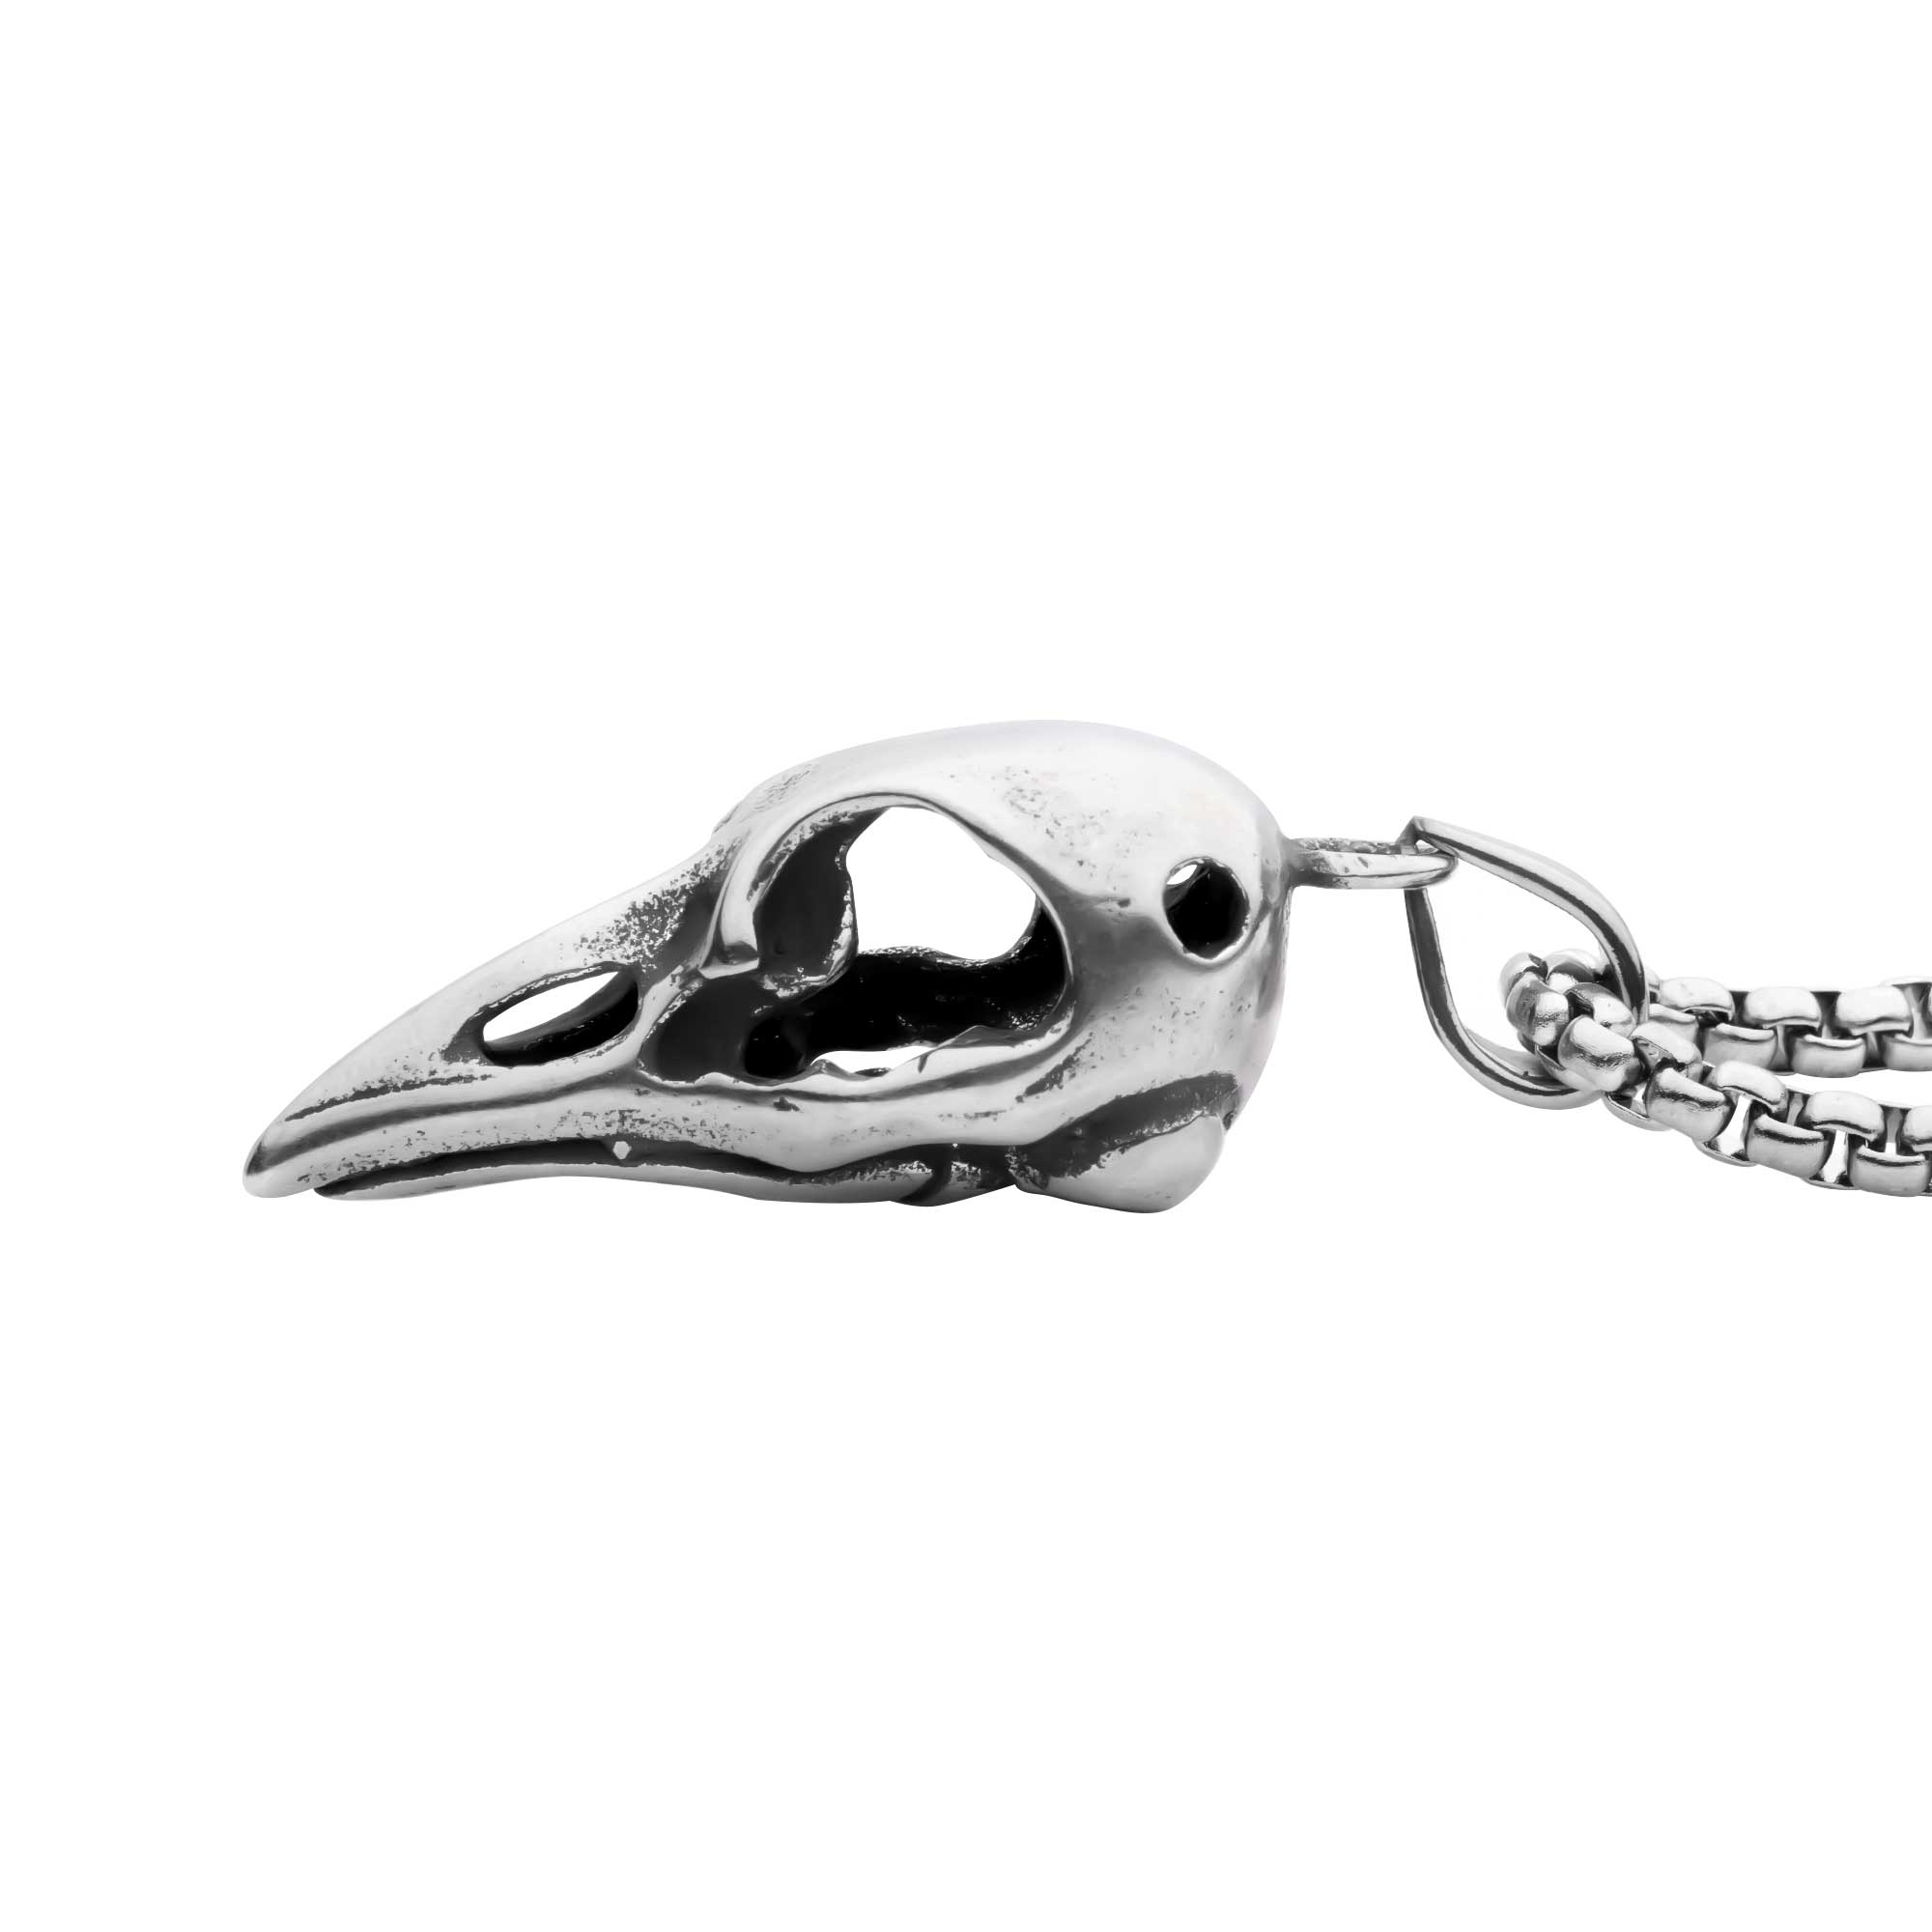 Distressed Matte Steel Crow Skull Pendant with Chain Image 3 Spath Jewelers Bartow, FL